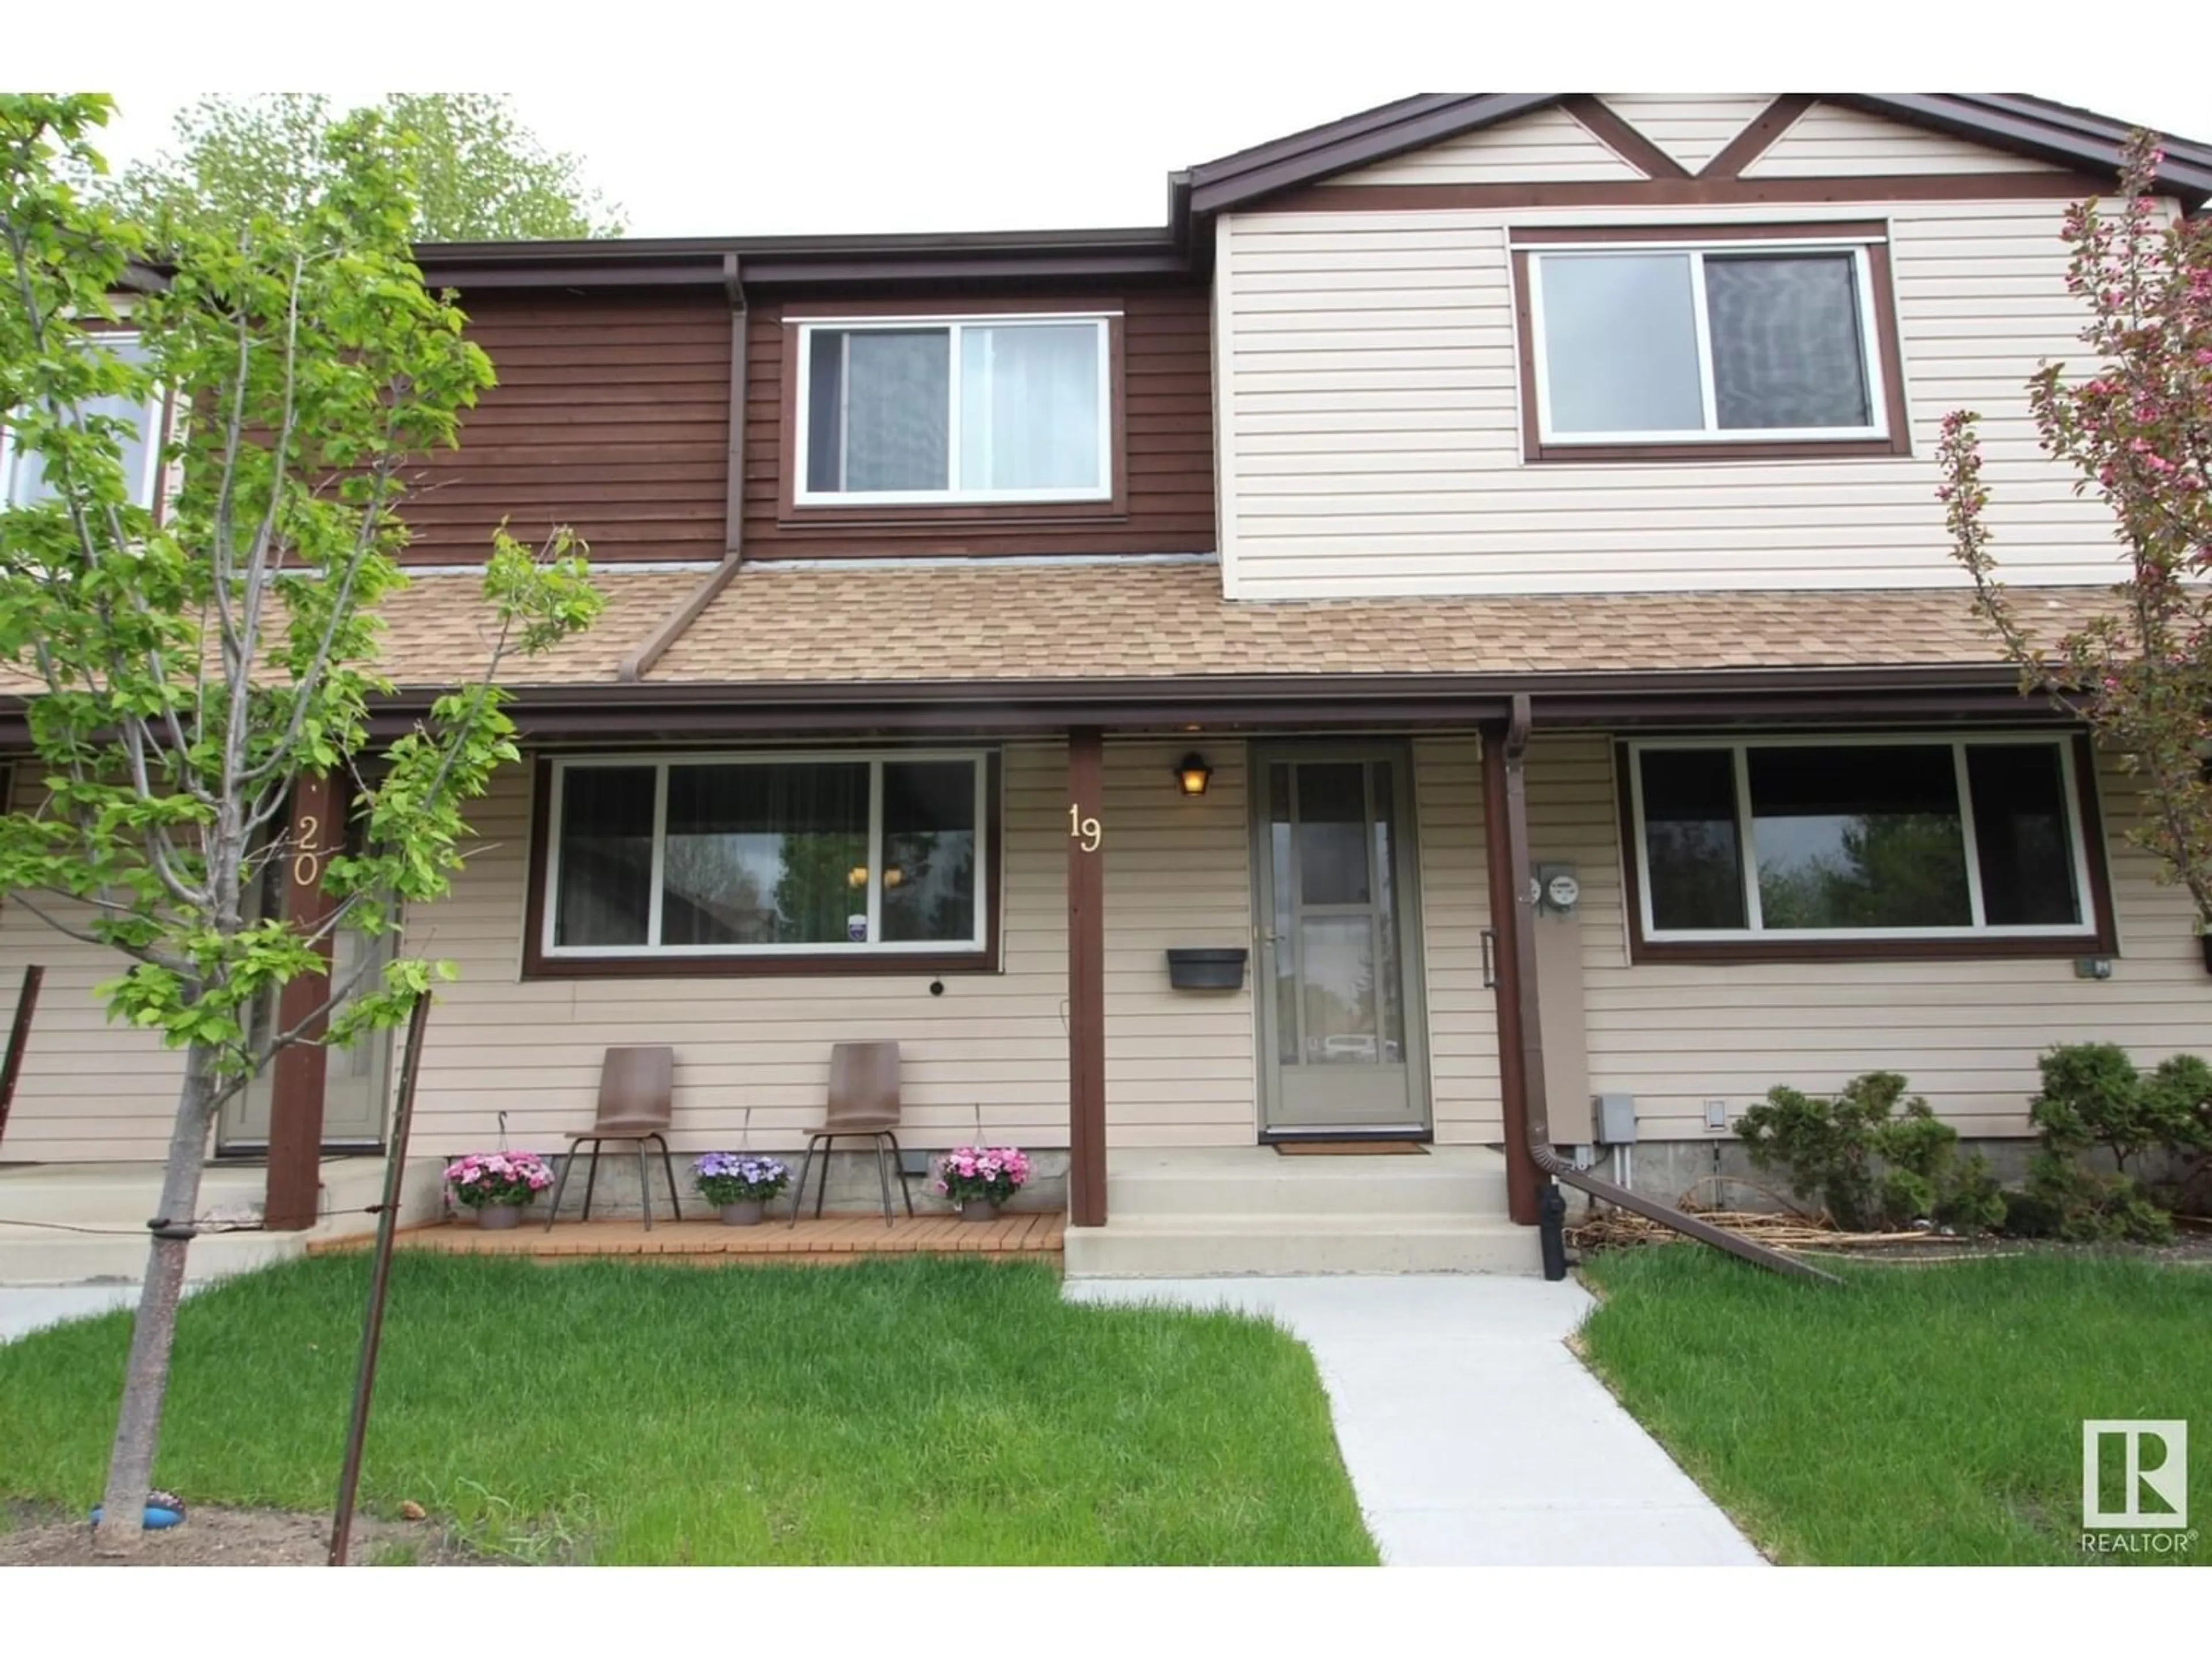 A pic from exterior of the house or condo for #19 13833 30 ST NW, Edmonton Alberta T5Y2B2